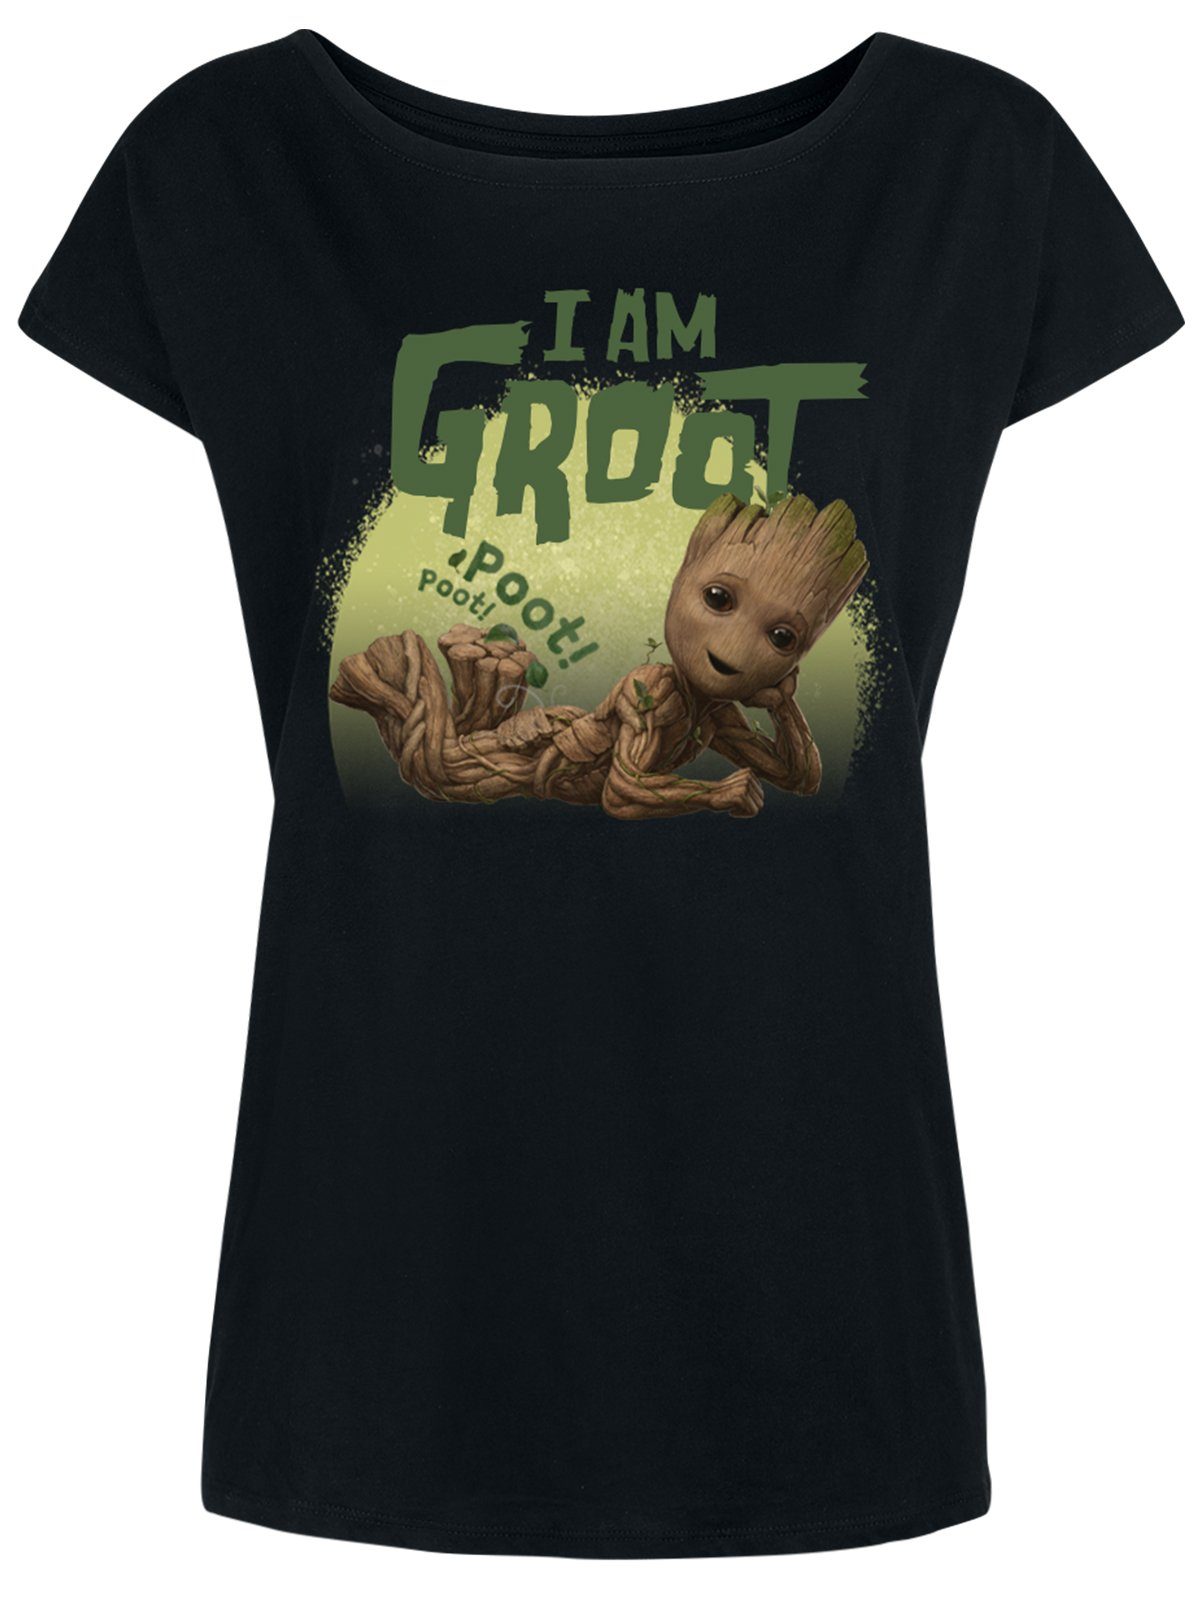 Guardians of Galaxy Poot! MARVEL Poot! the T-Shirt